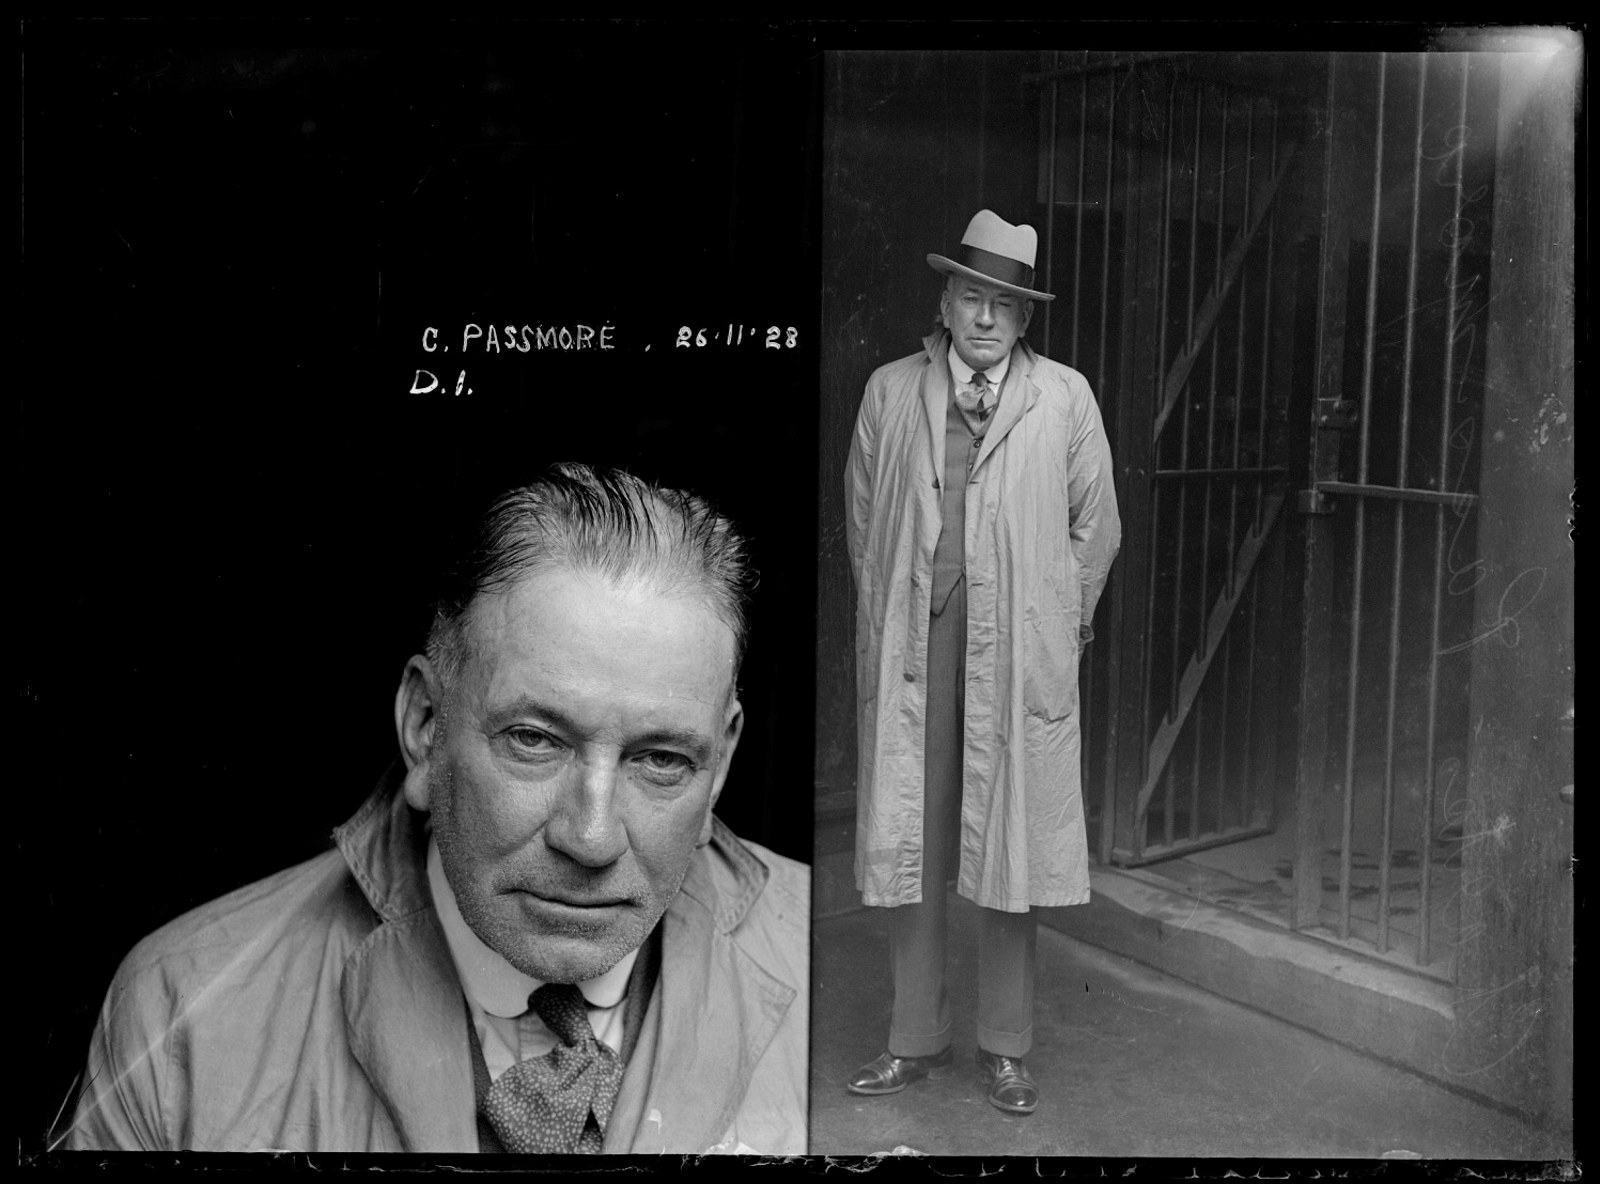 Charles Passmore (alias Charles St Julian Passmore), Special Photograph number D1, 26 November 1928, probably Central Police Station, Sydney